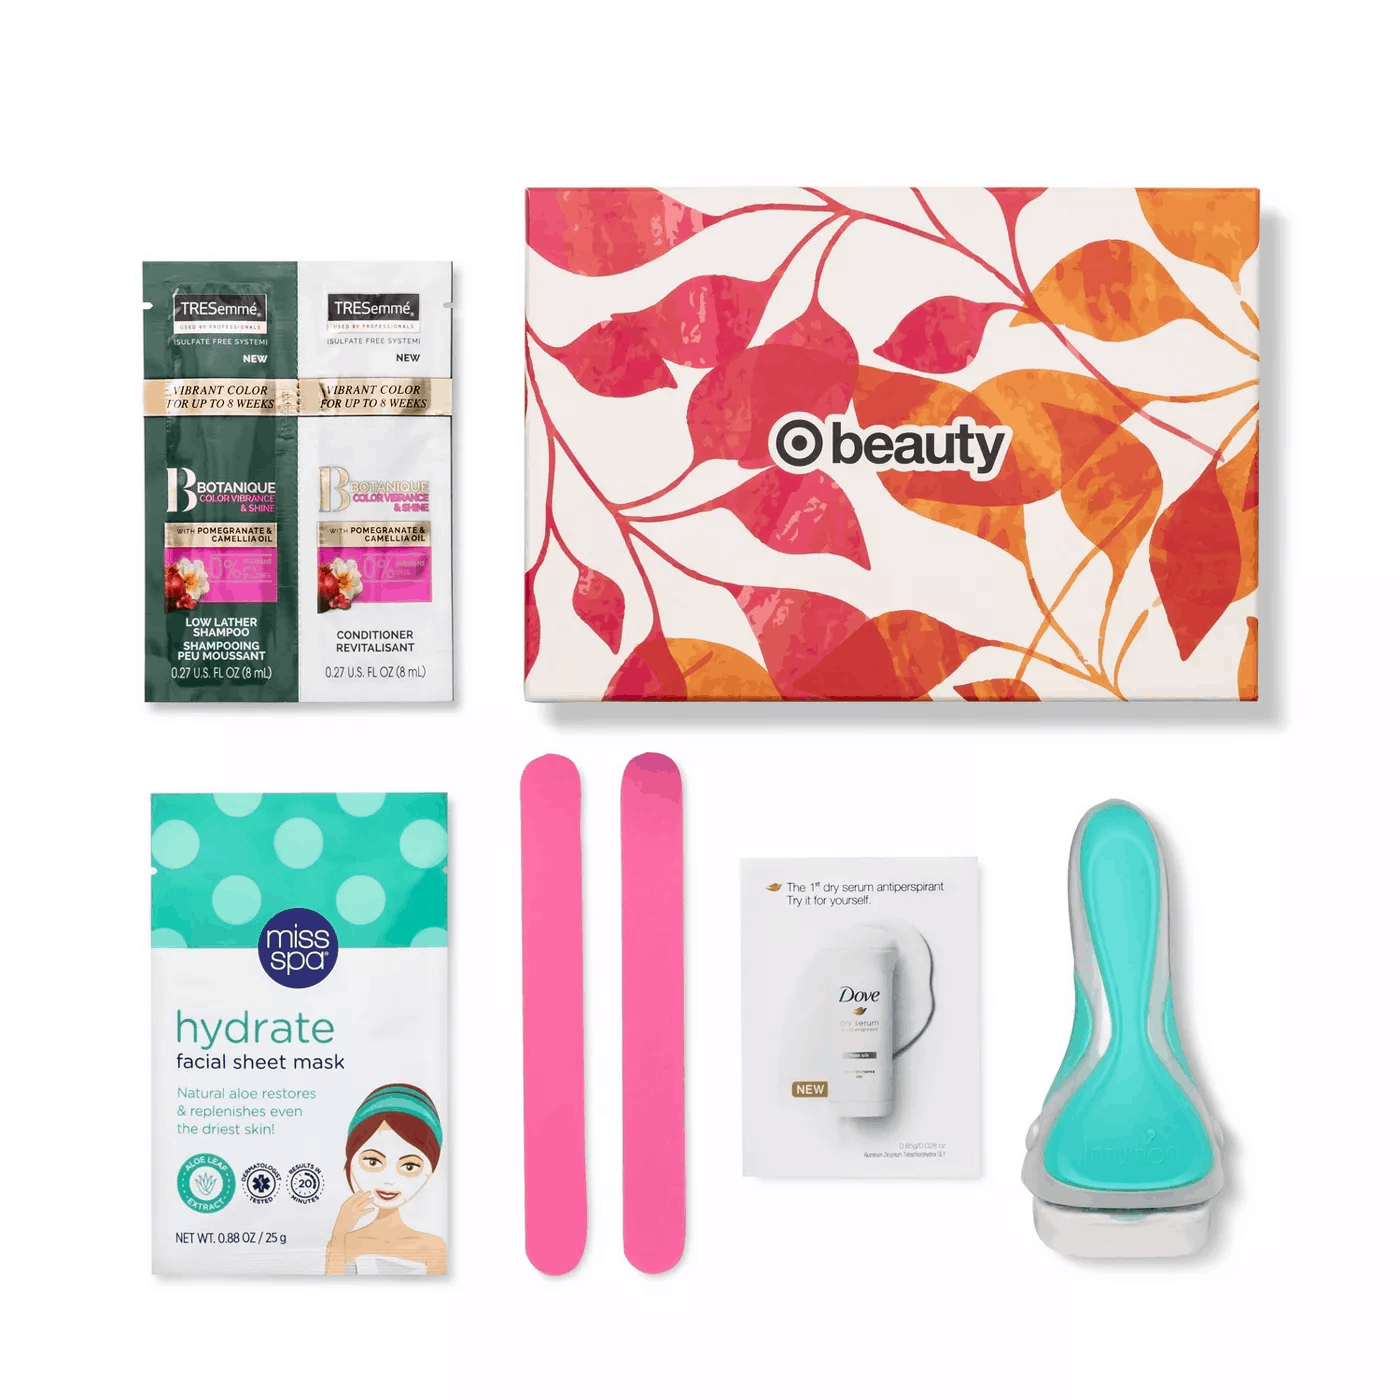 September 2019 Target Beauty Box Available Now - $7 ...